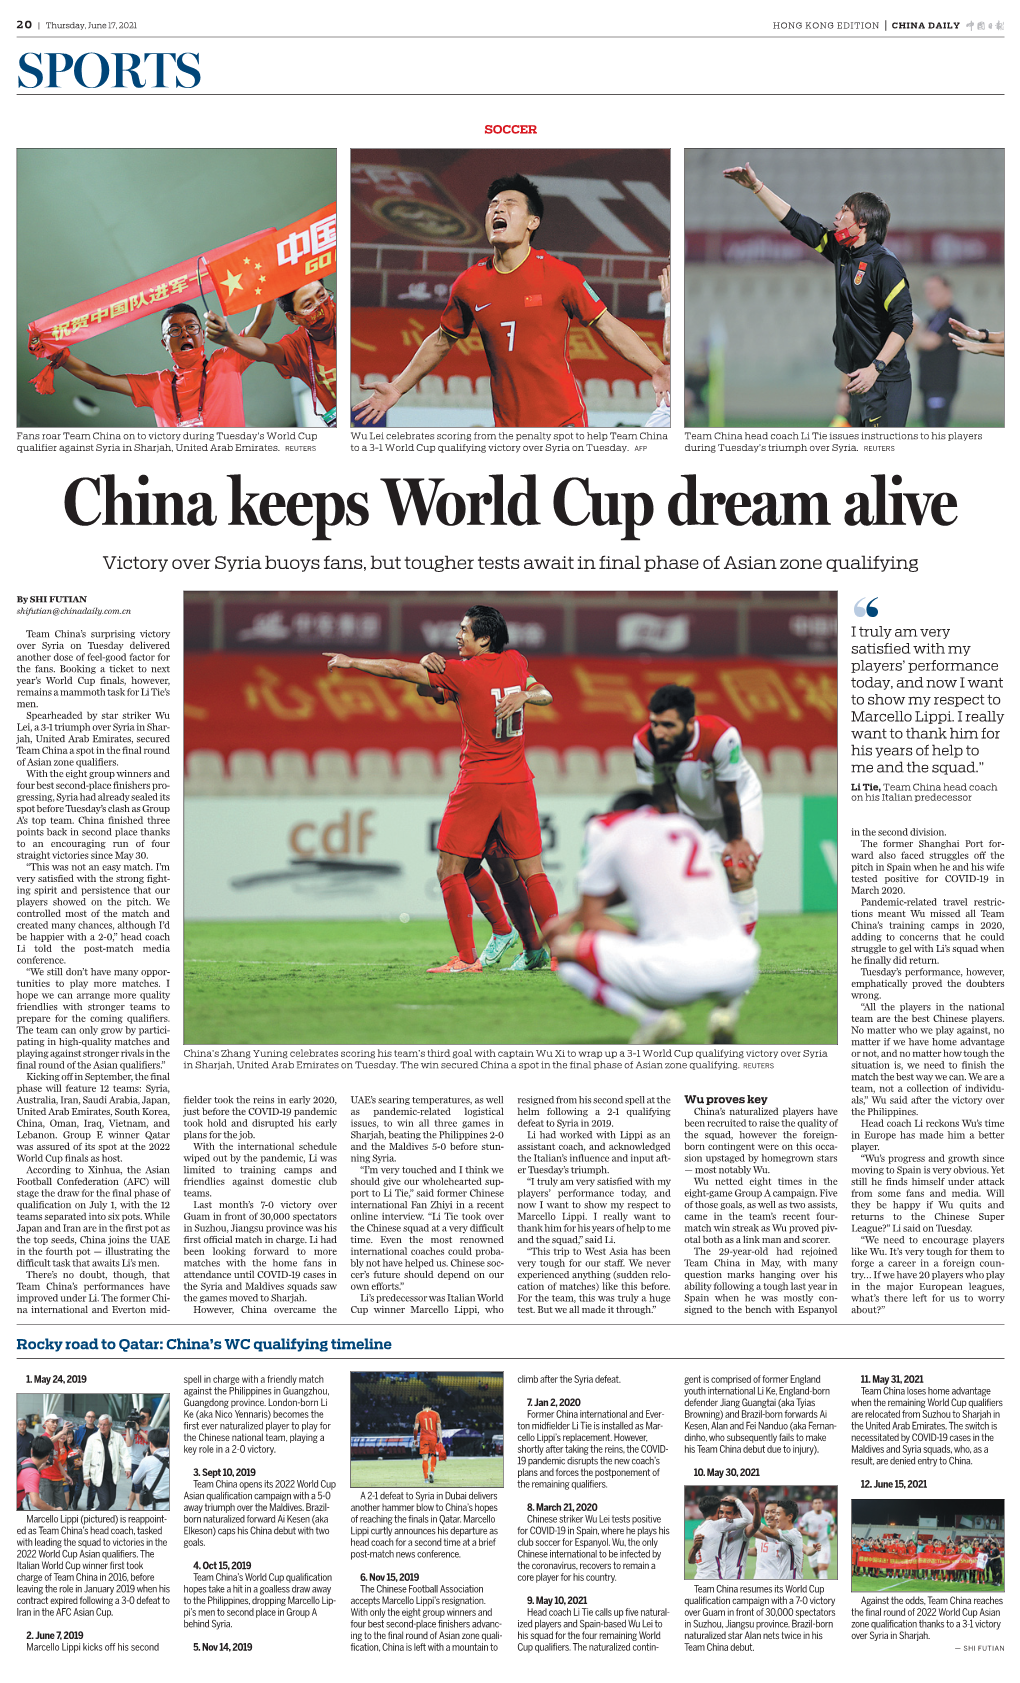 China Keeps World Cup Dream Alive Victory Over Syria Buoys Fans, but Tougher Tests Await in Final Phase of Asian Zone Qualifying